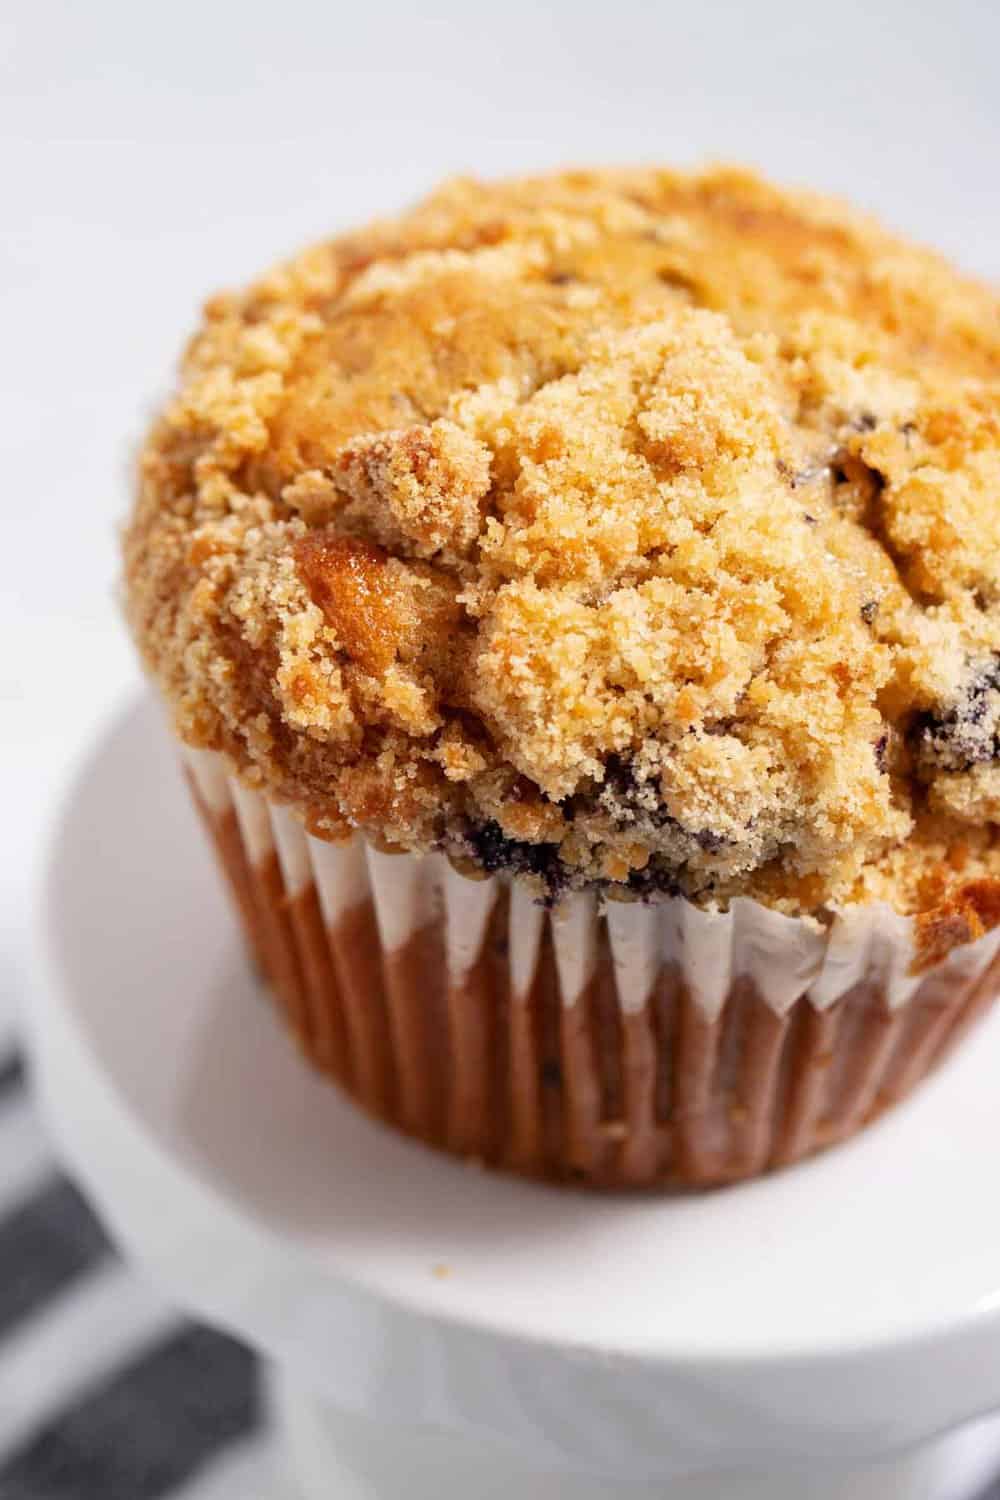 bakery style muffin with streusel topping